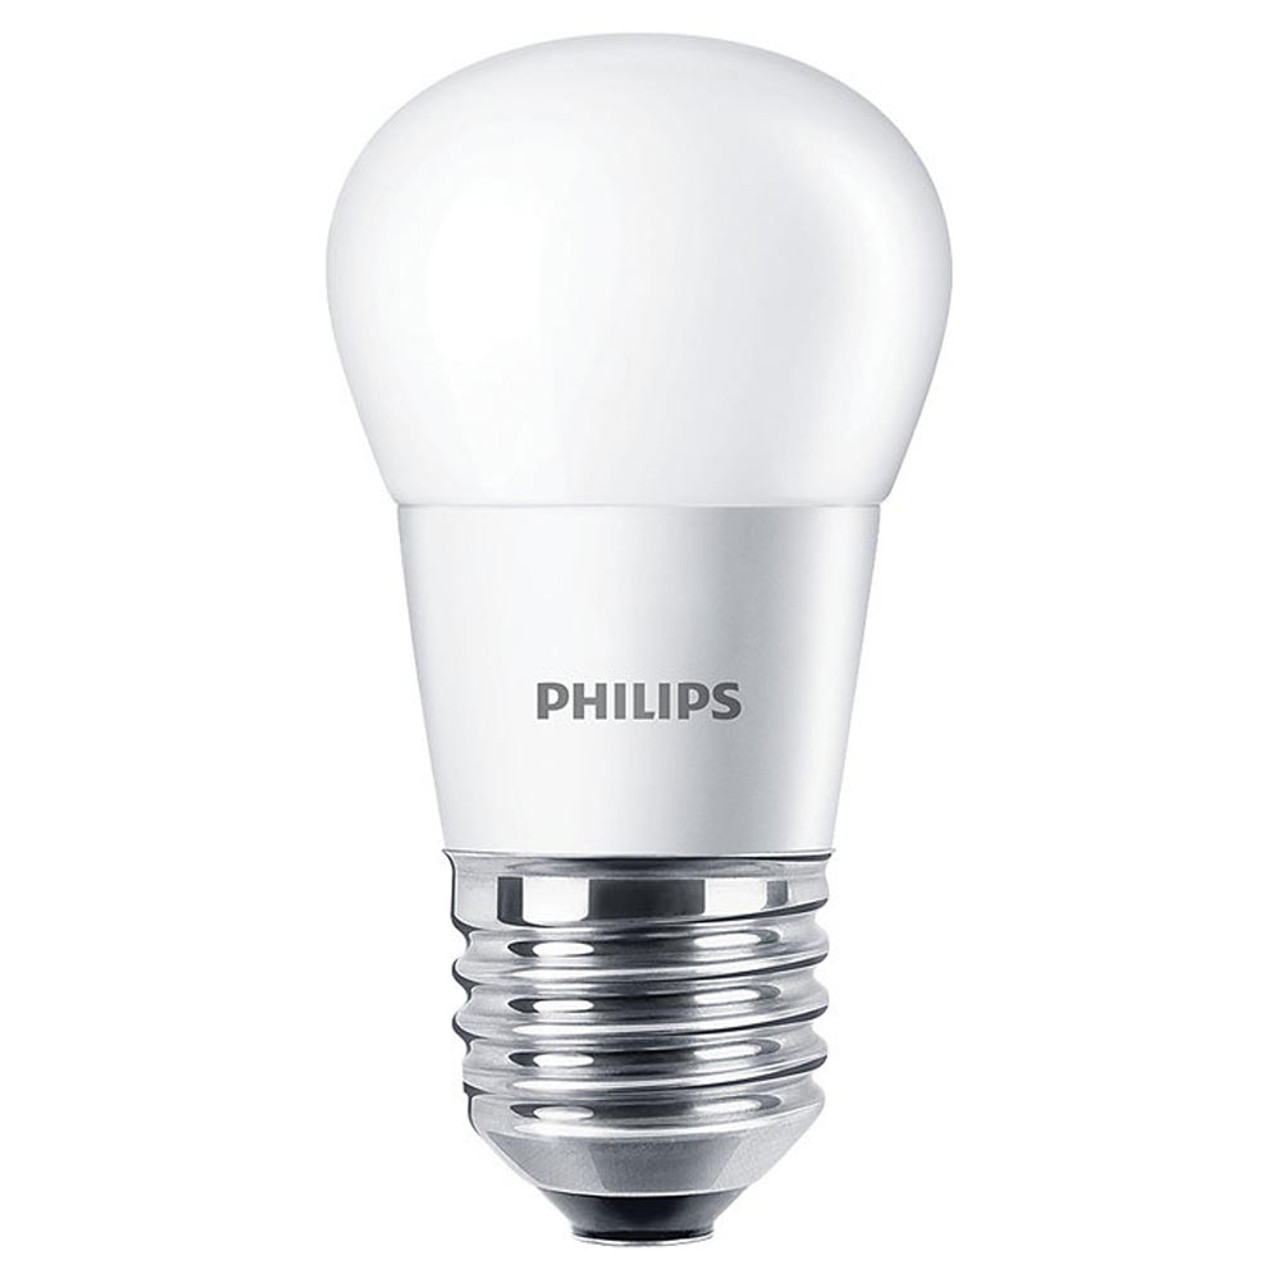 Philips Core Pro LED P45 2.8W (25W) E27 Frosted Very Warm White